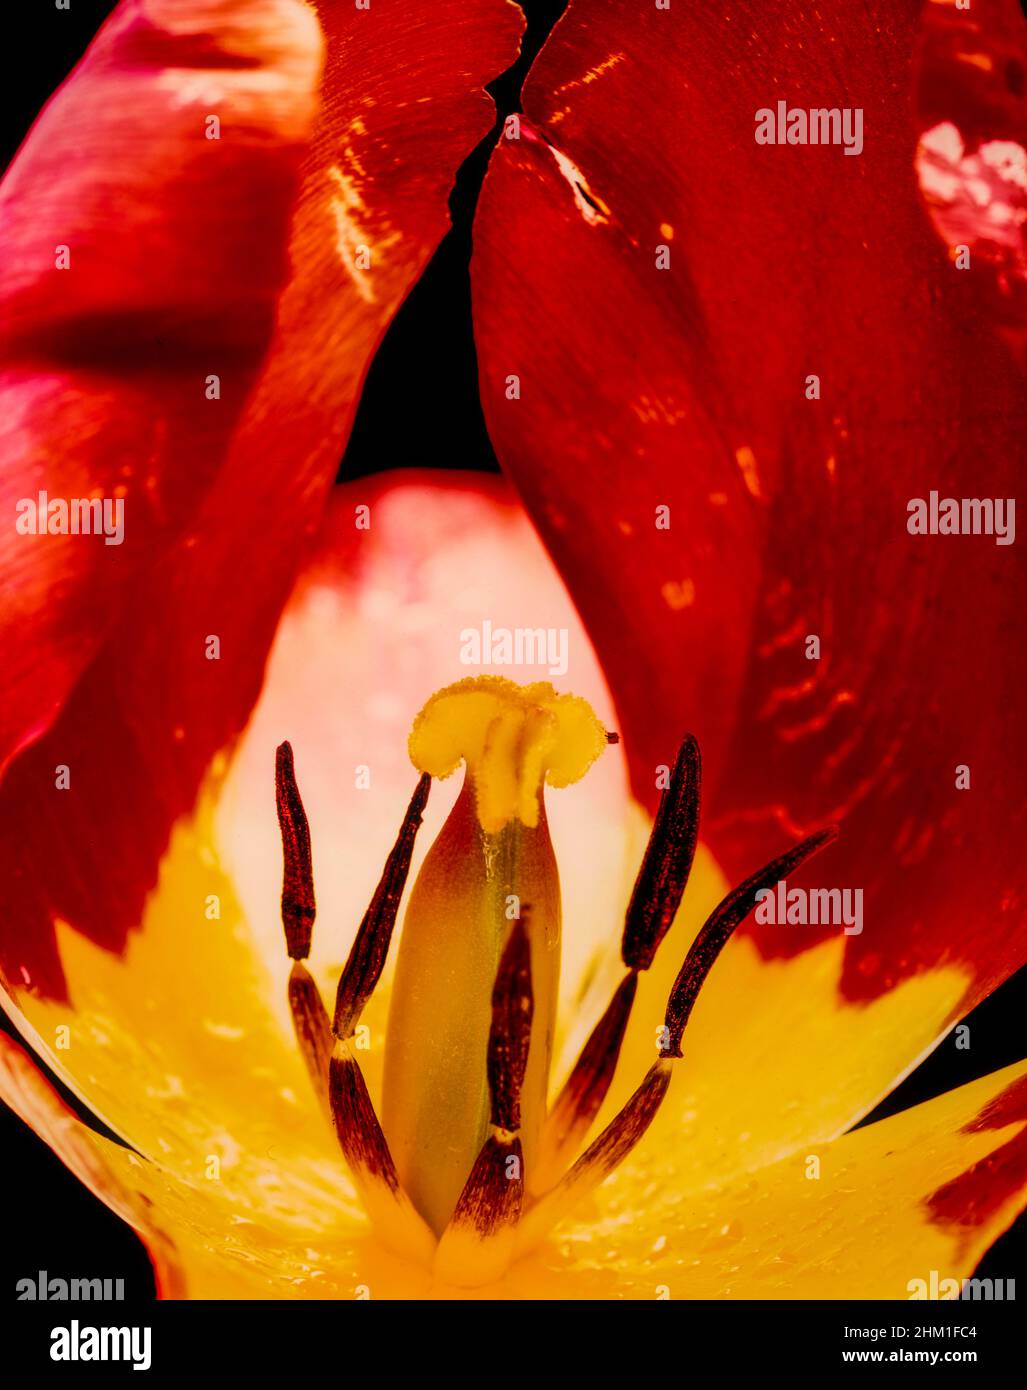 Macro semi-abstract flower still-life portrait of colourful Tulip flower against plain background Stock Photo